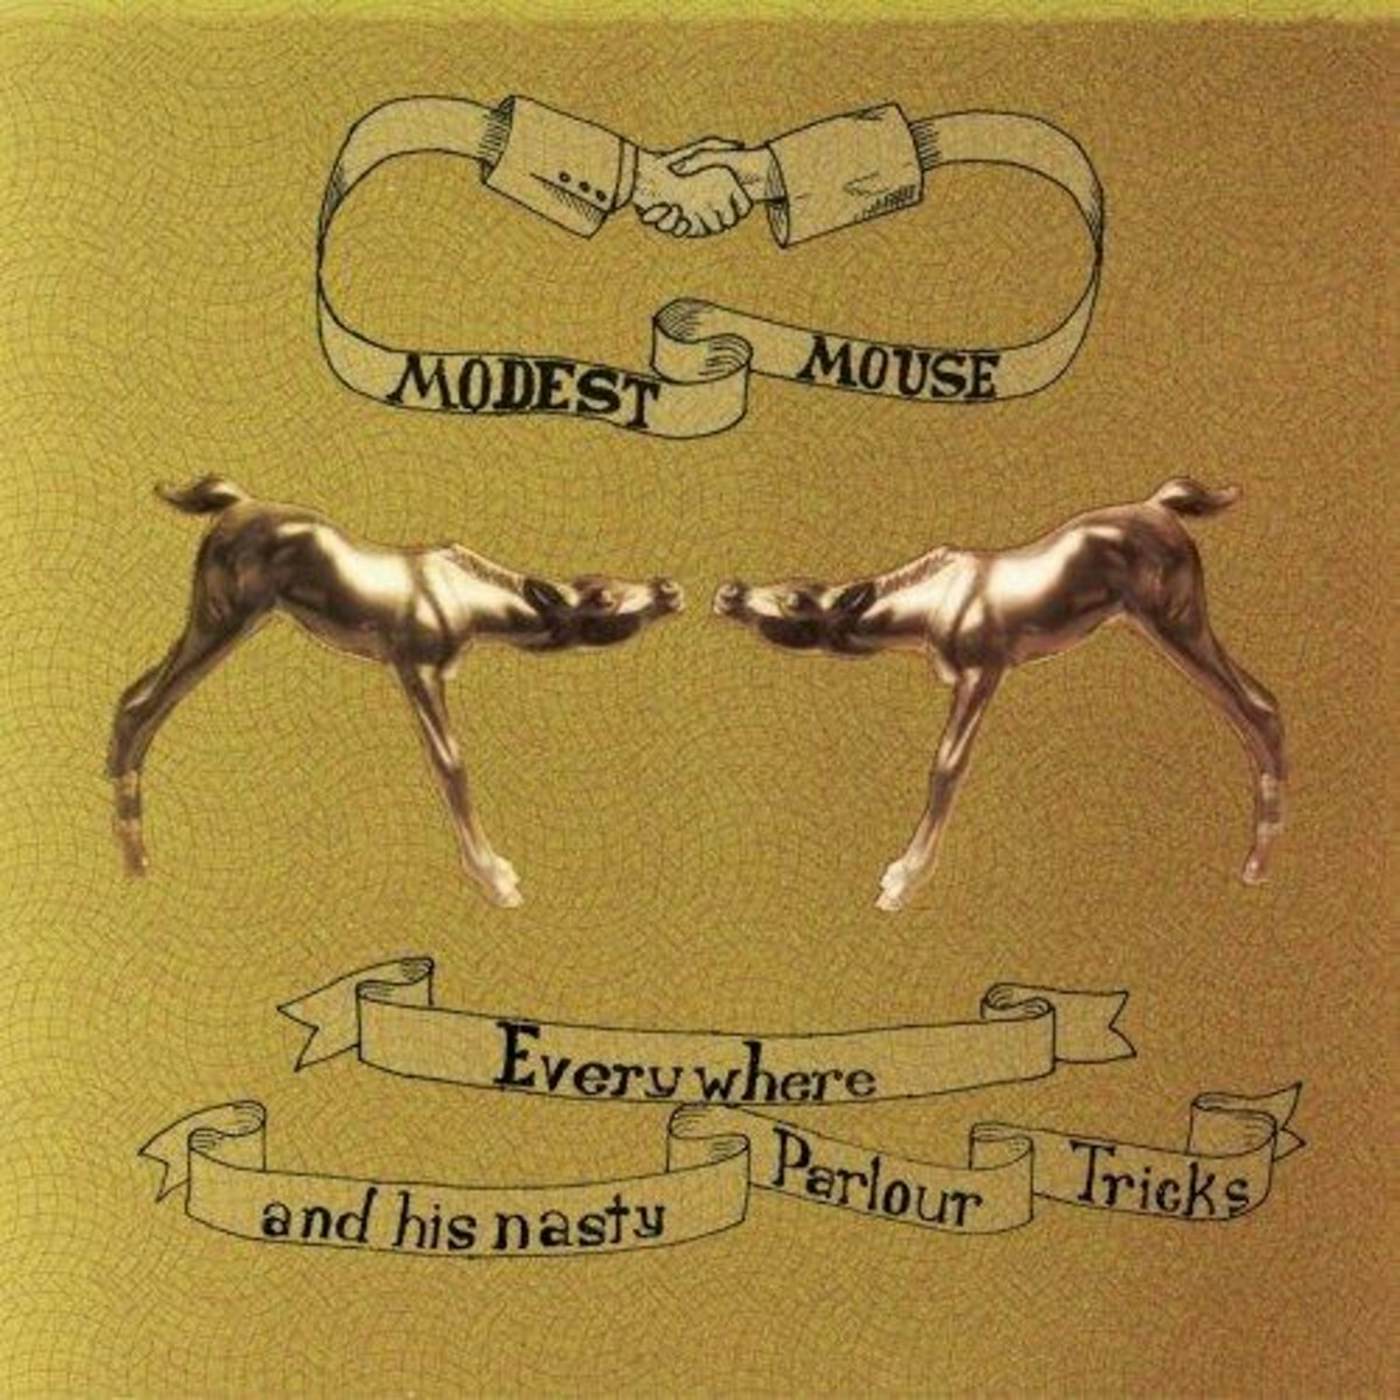 Modest Mouse Everywhere And His Nasty Parlour Tricks LP (Vinyl)